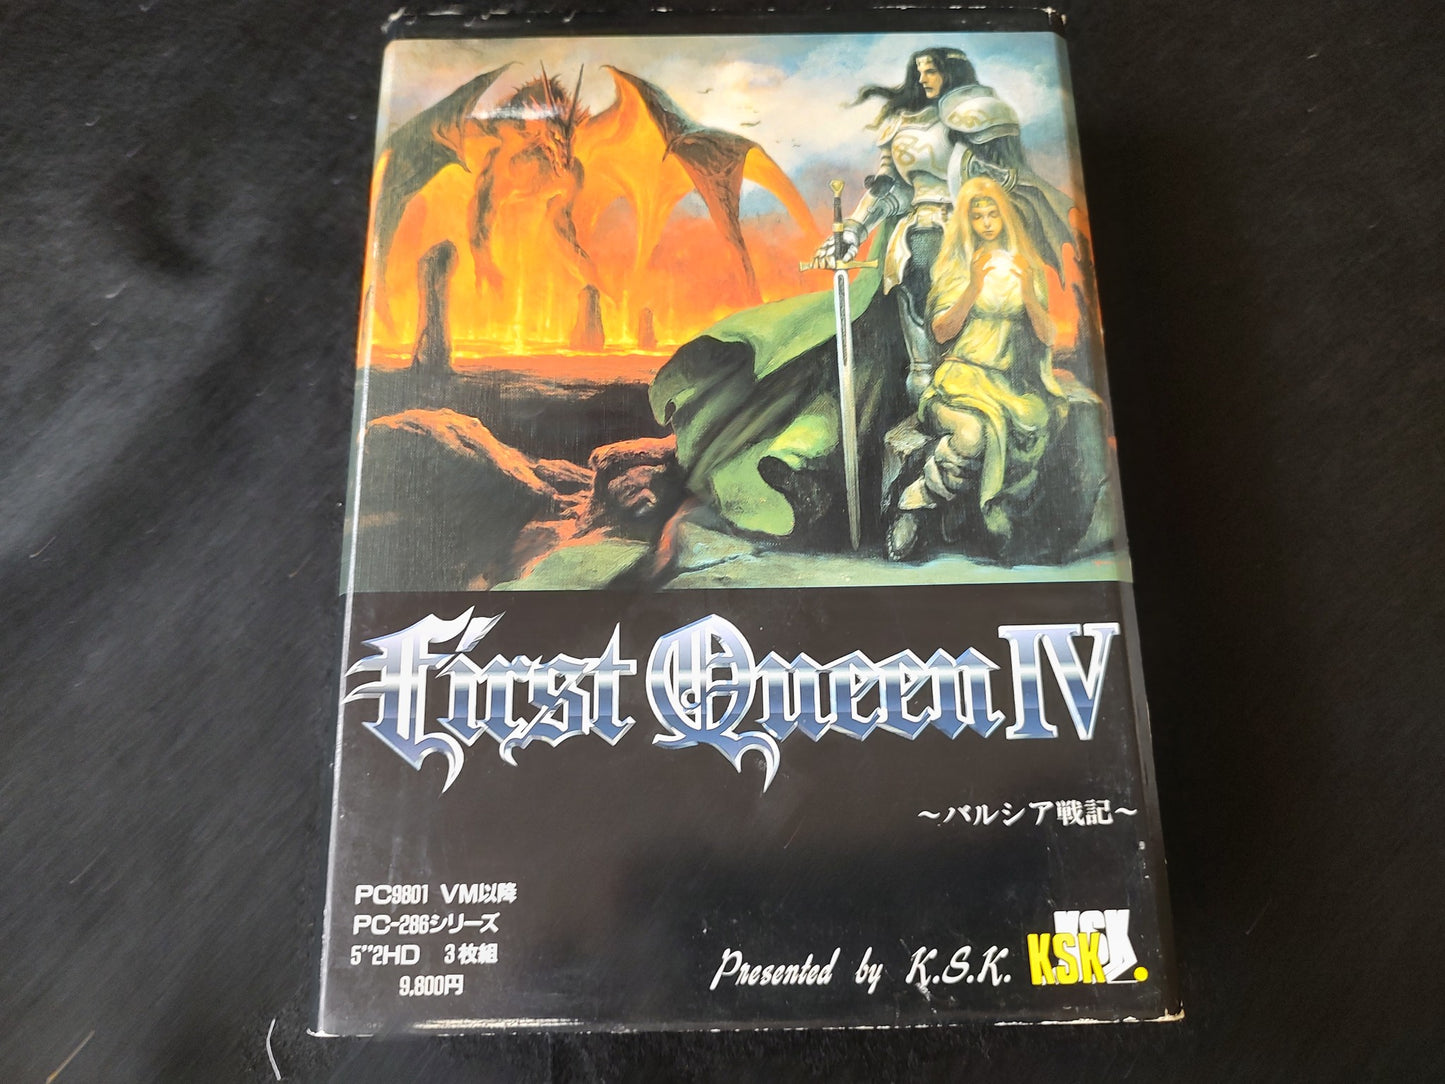 PC-9801 PC98 First Queen 4 Game Floppy disks, w/Manual, Box set,Not tested-f0626